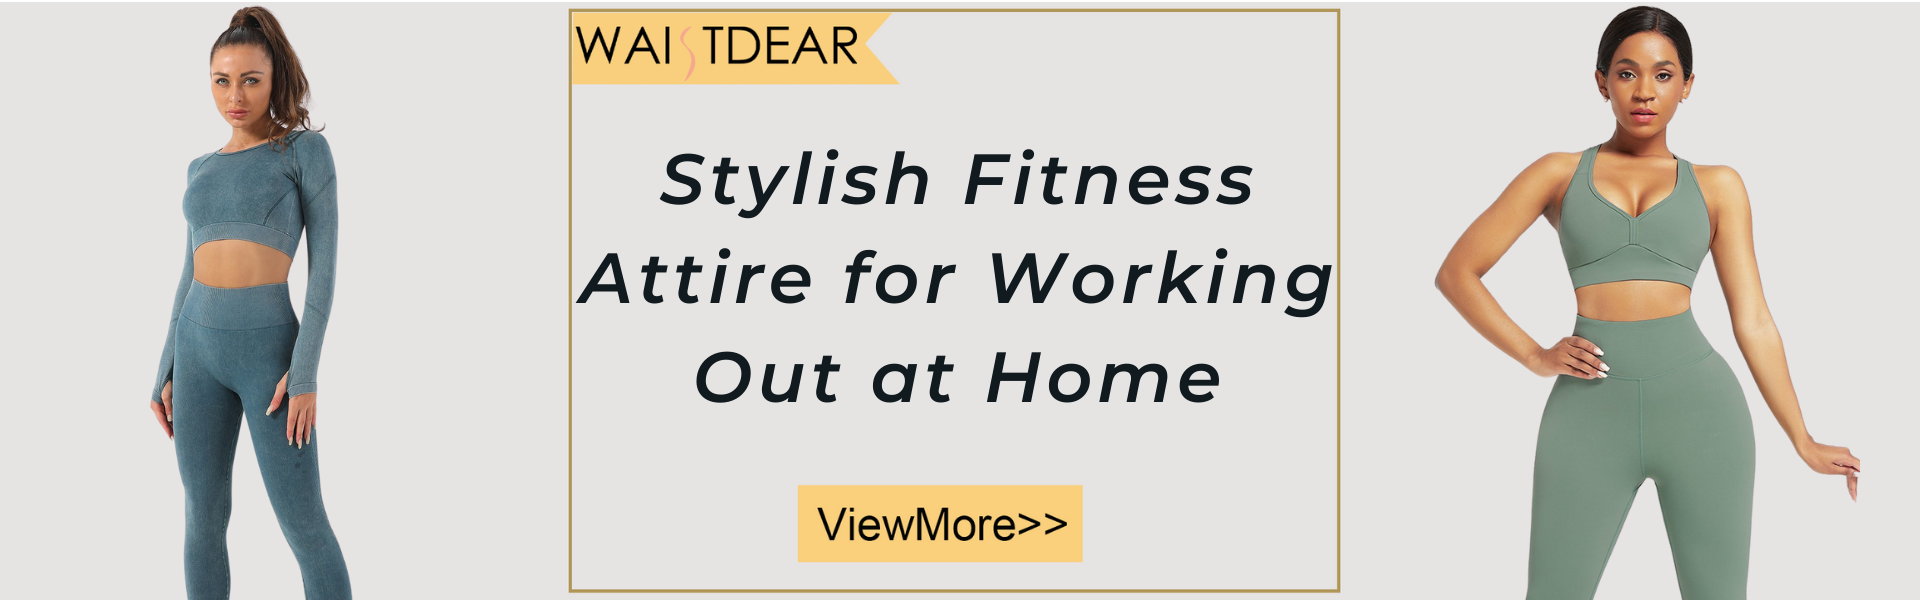 Stylish Fitness Attire for Working Out at Home